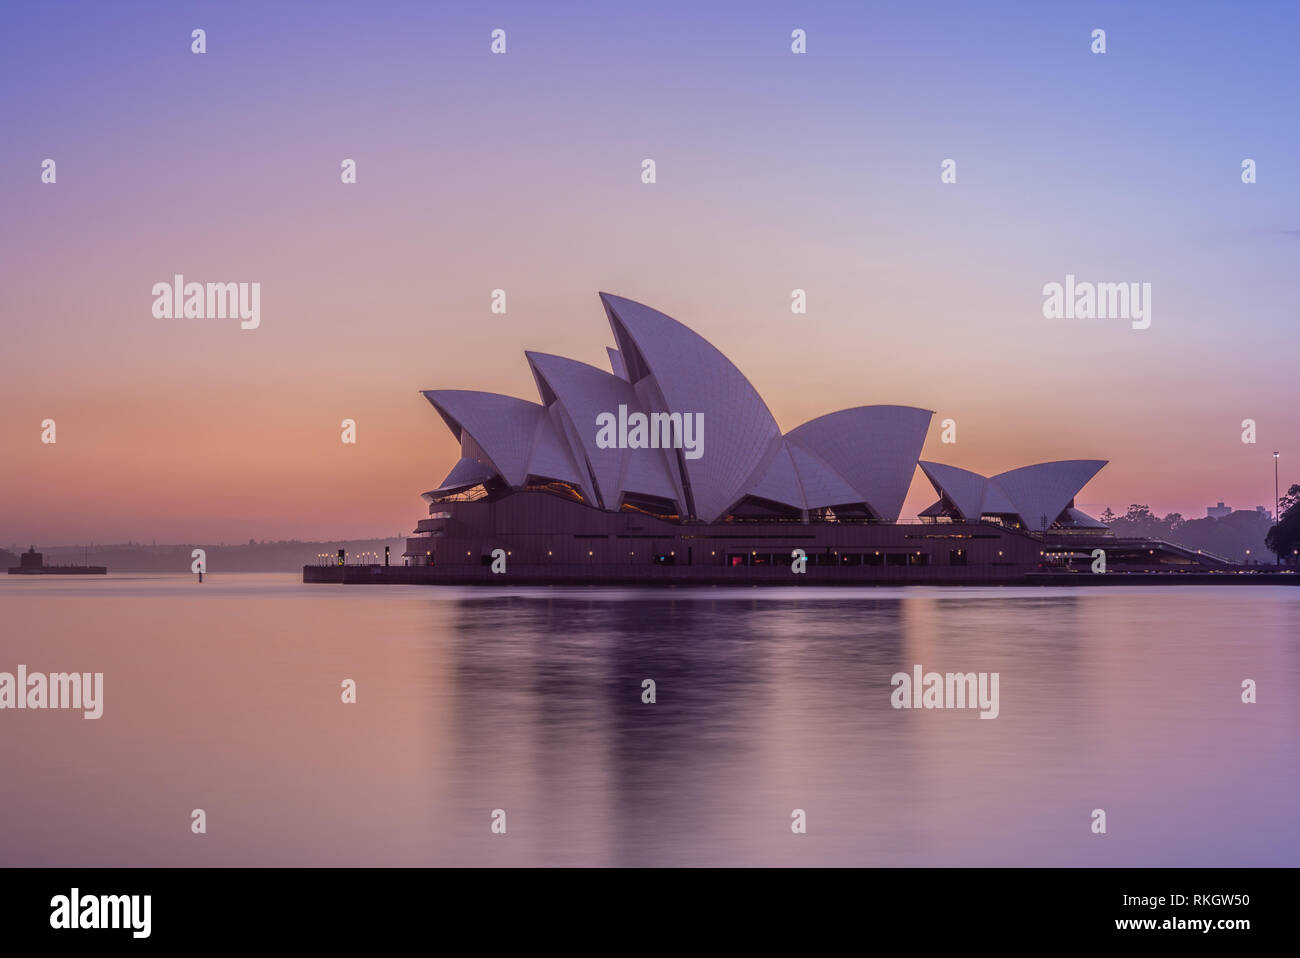 Sydney, Australia - January 6, 2019: sydney opera house at sunrise. This building is one of the 20th century's most famous and distinctive buildings. Stock Photo